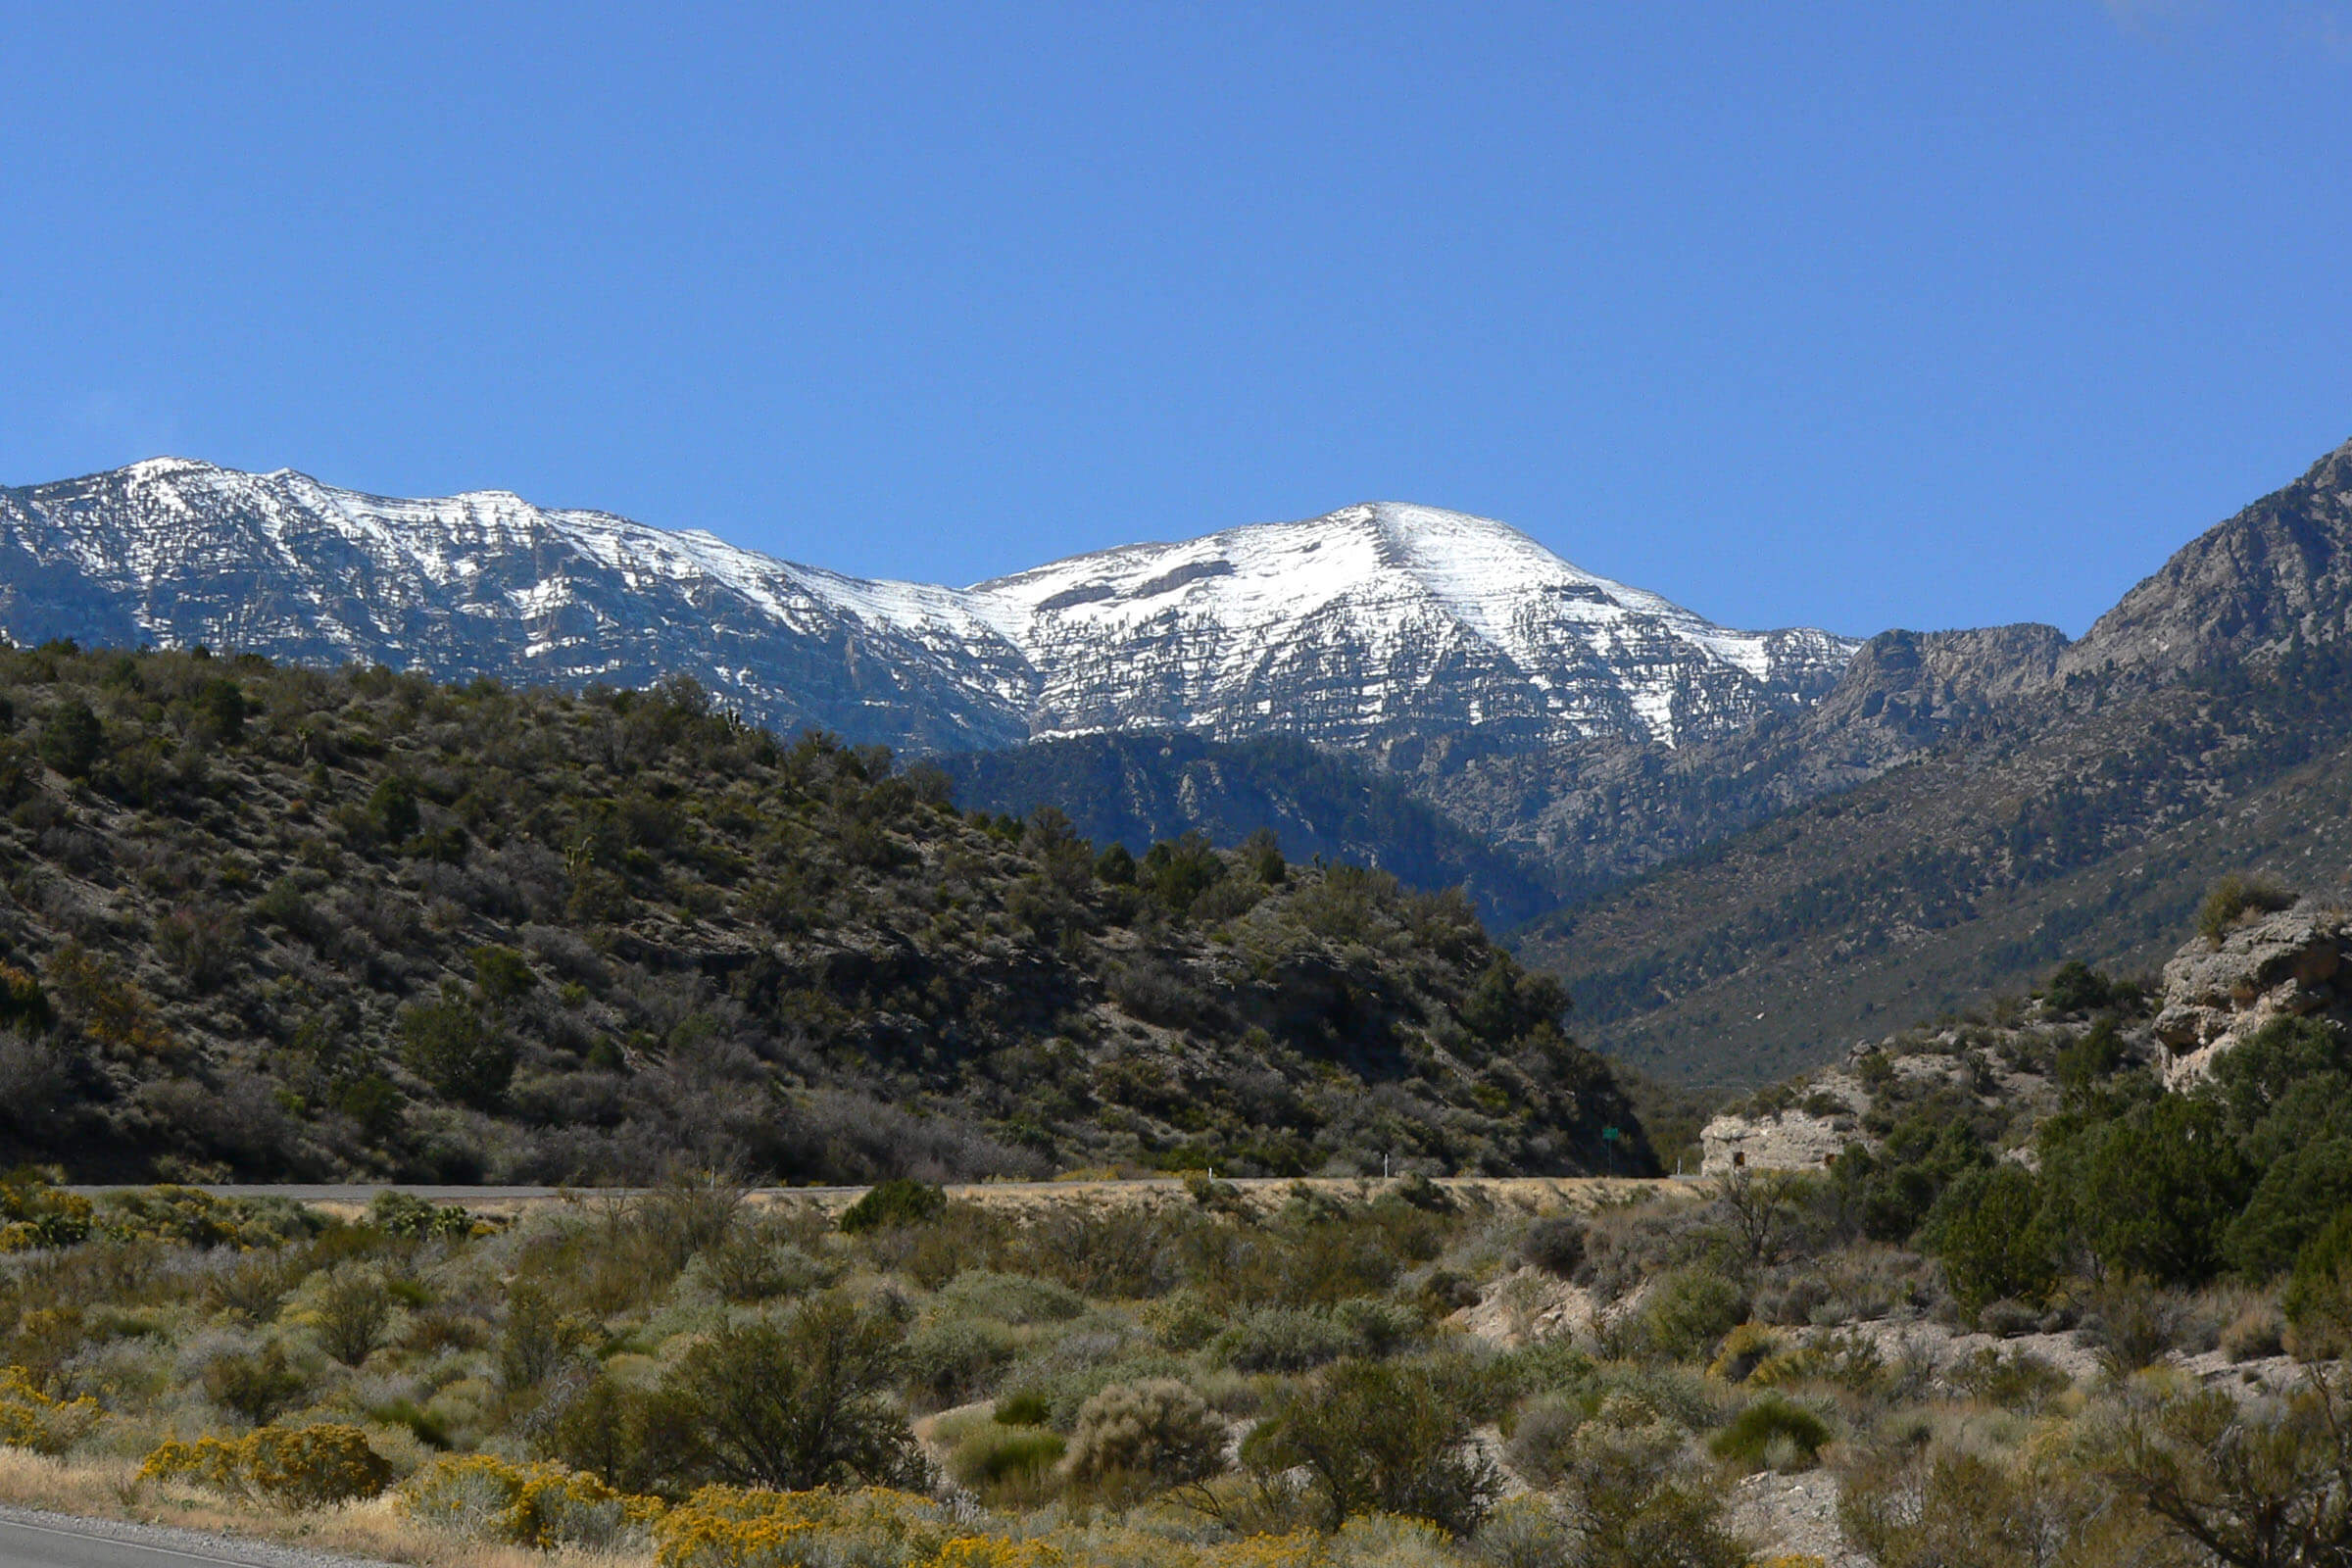 Mount Charleston viewed from Kylie Canyon